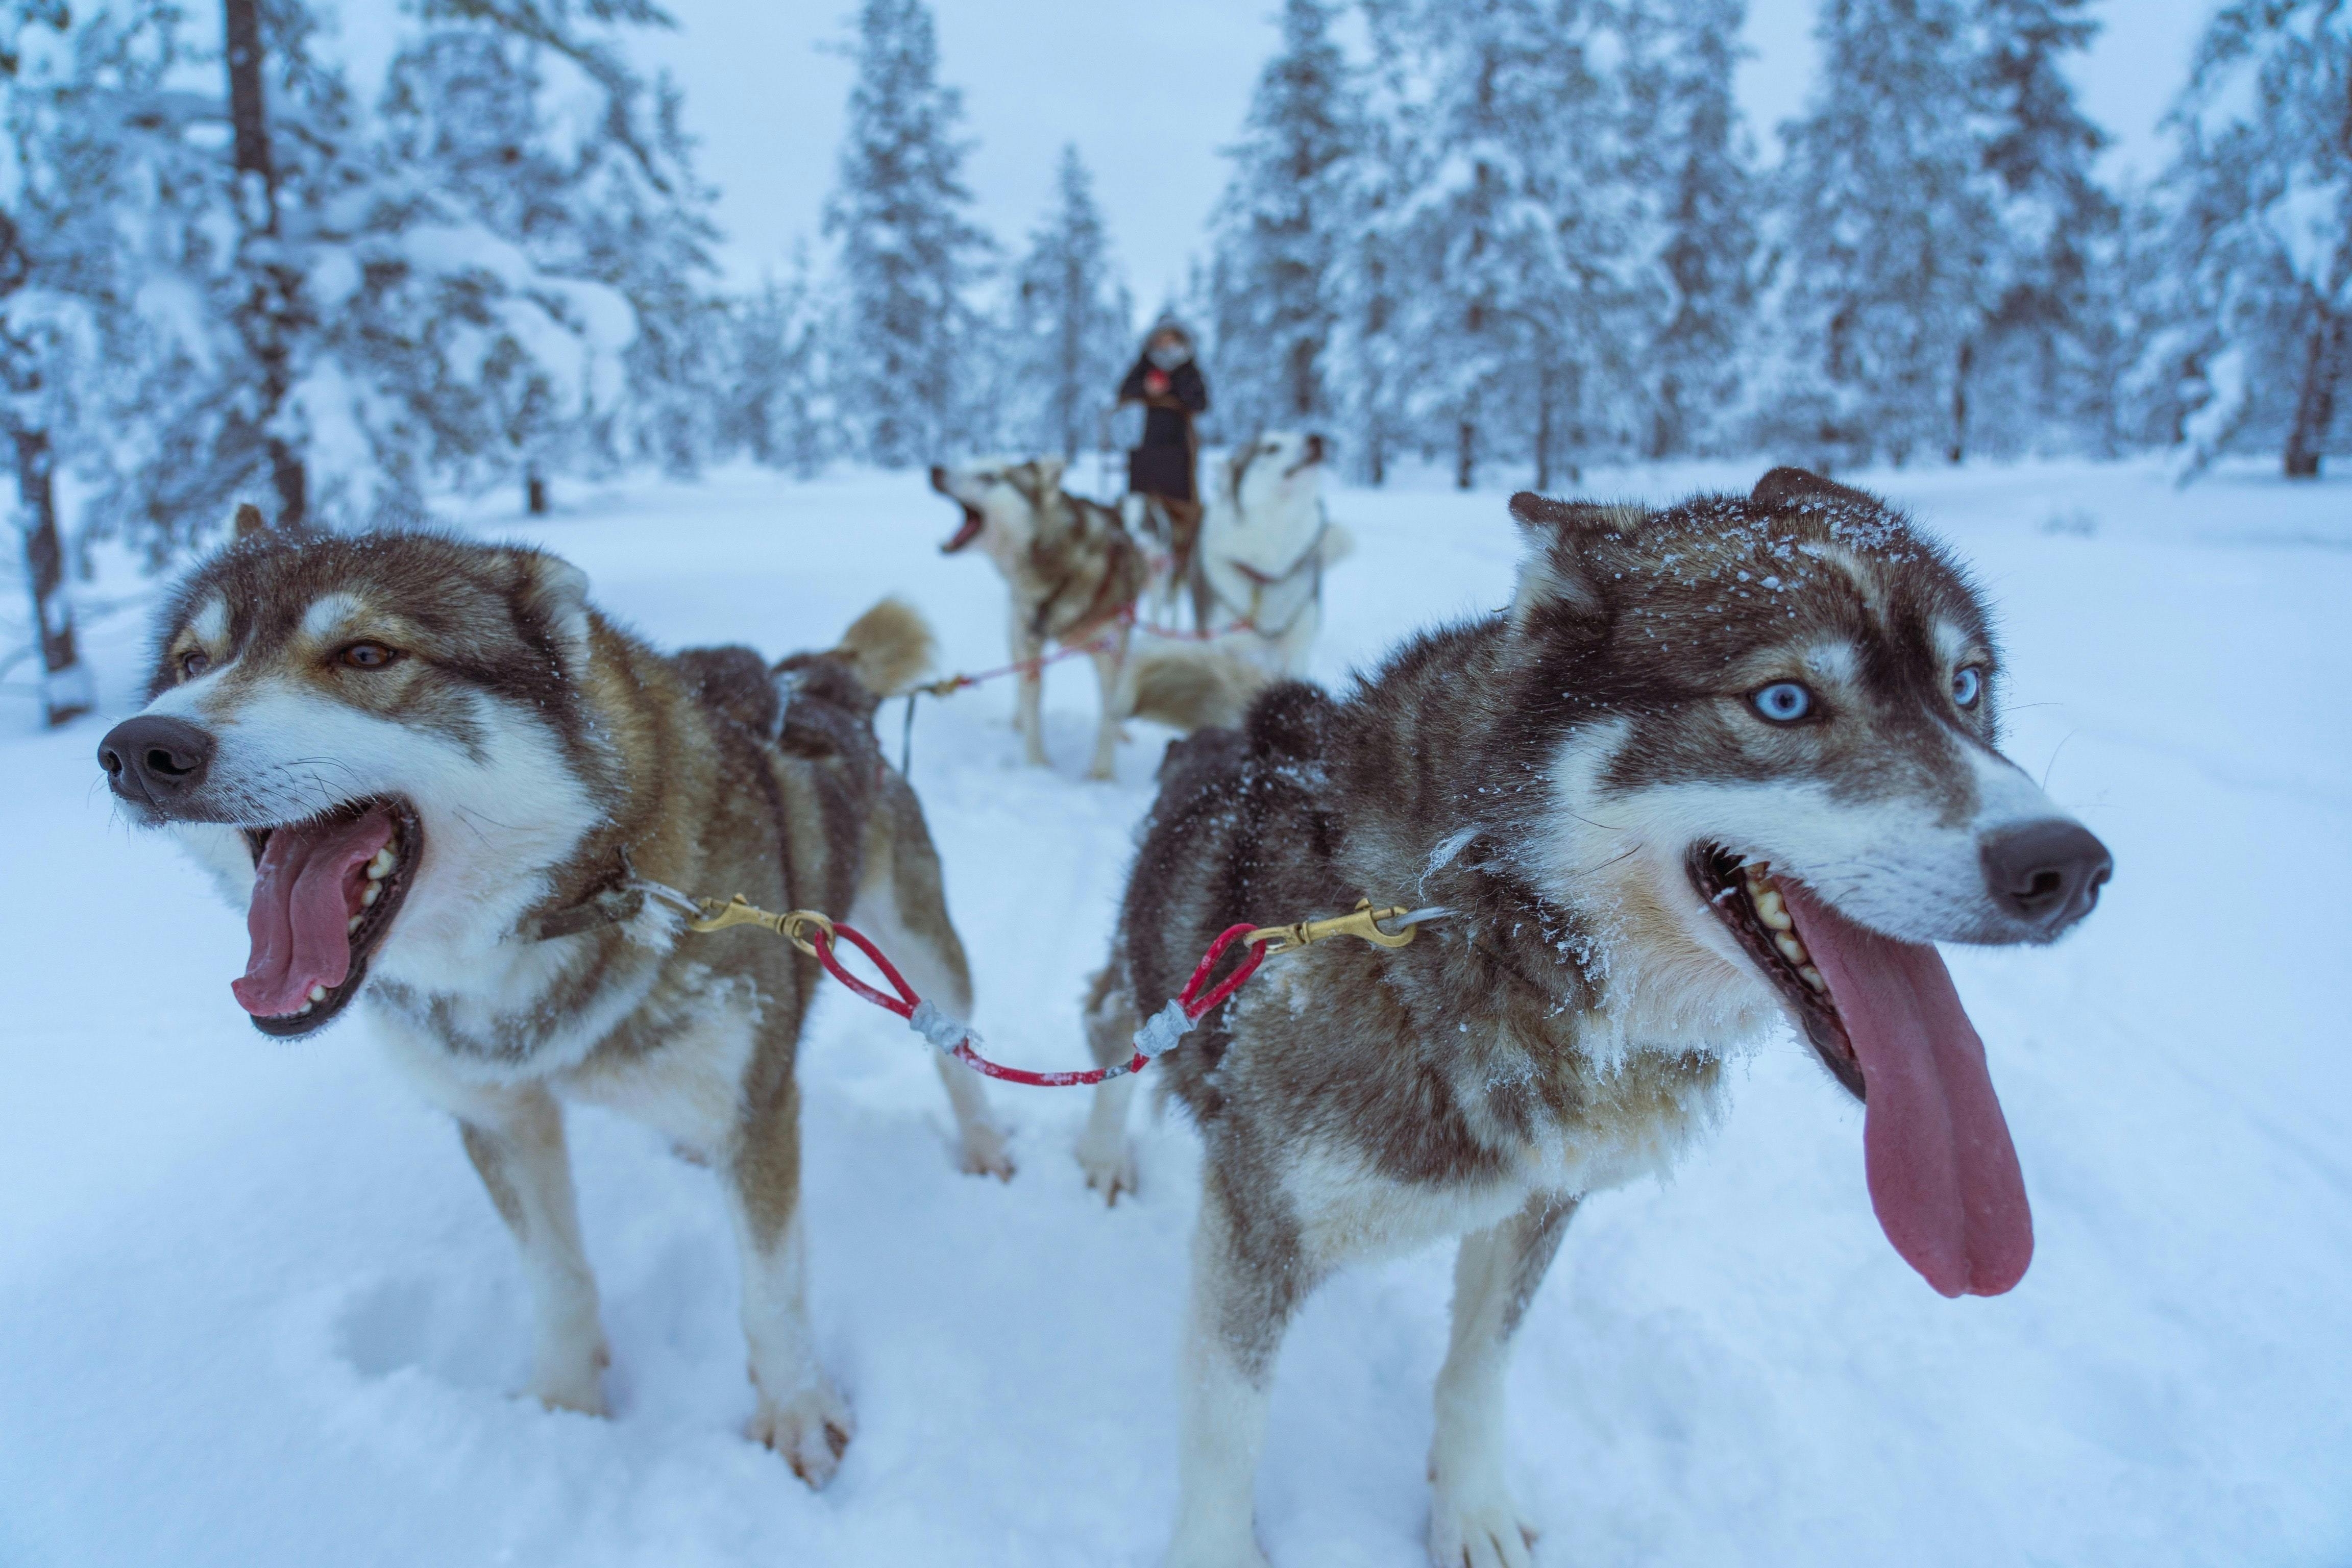 Siberian Husky dogs working as sled-pulling dogs in the snow